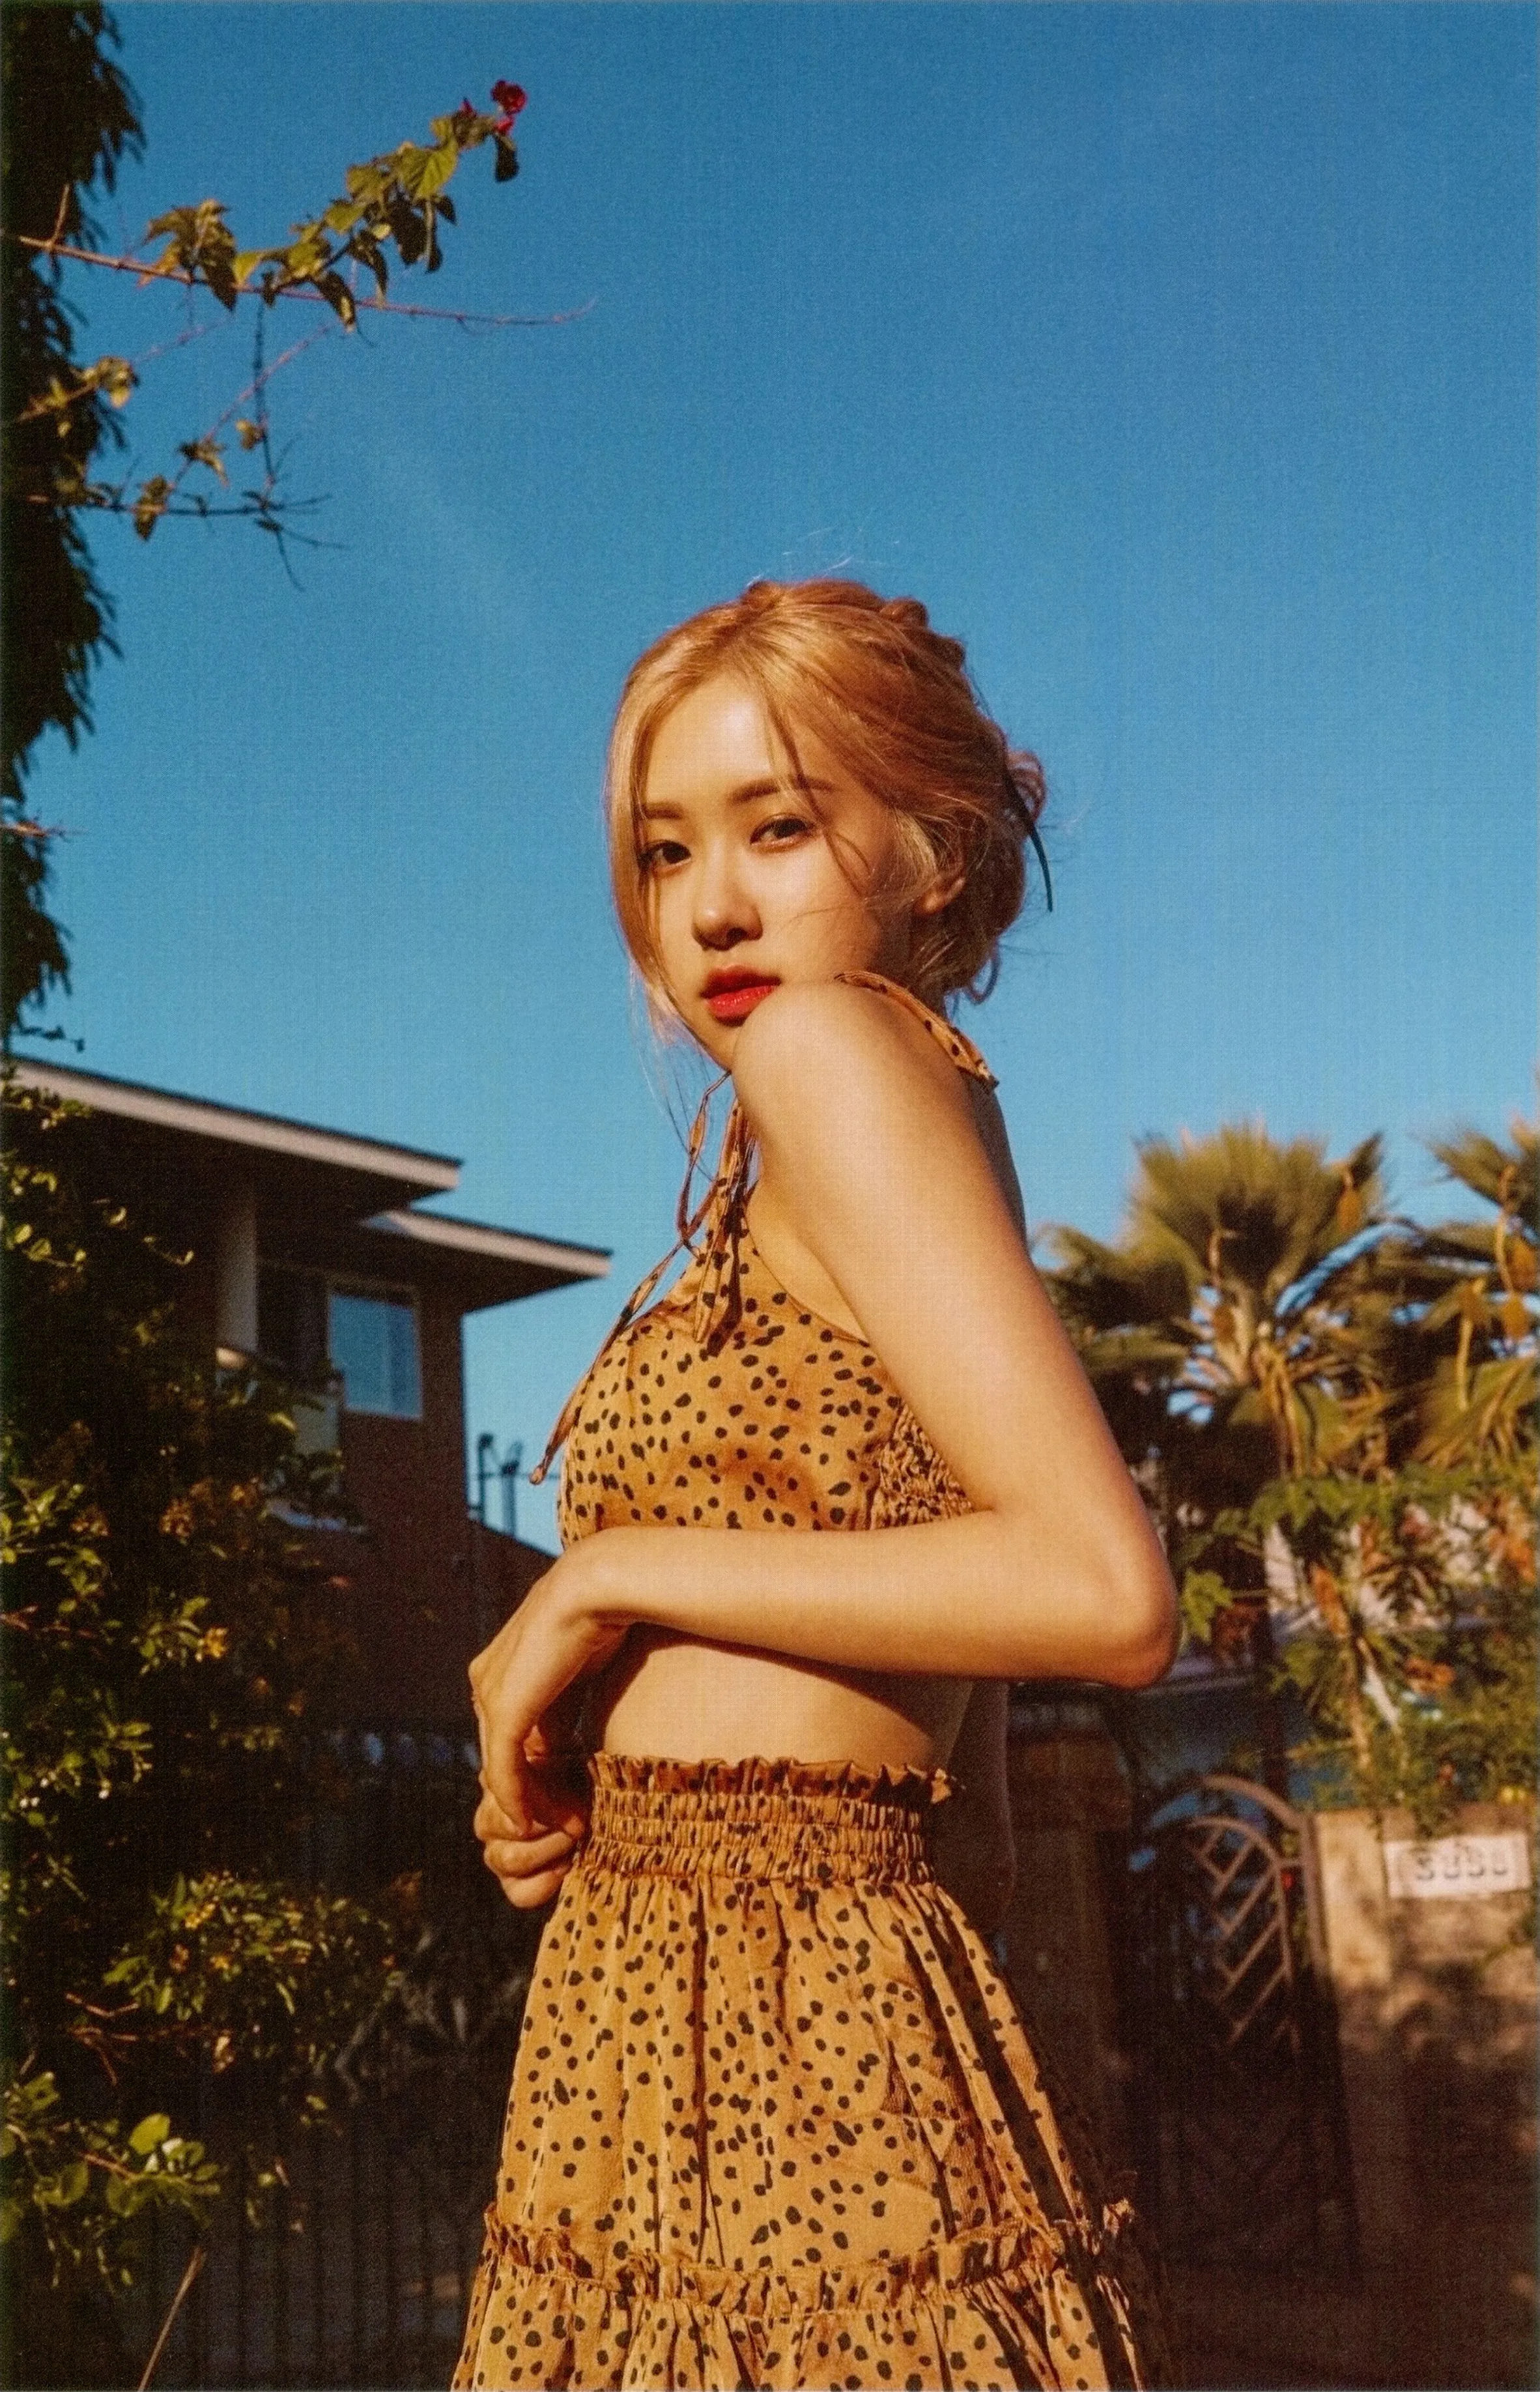 SCAN] 2019 BLACKPINK Summer Diary in Hawaii - Rose | kpopping